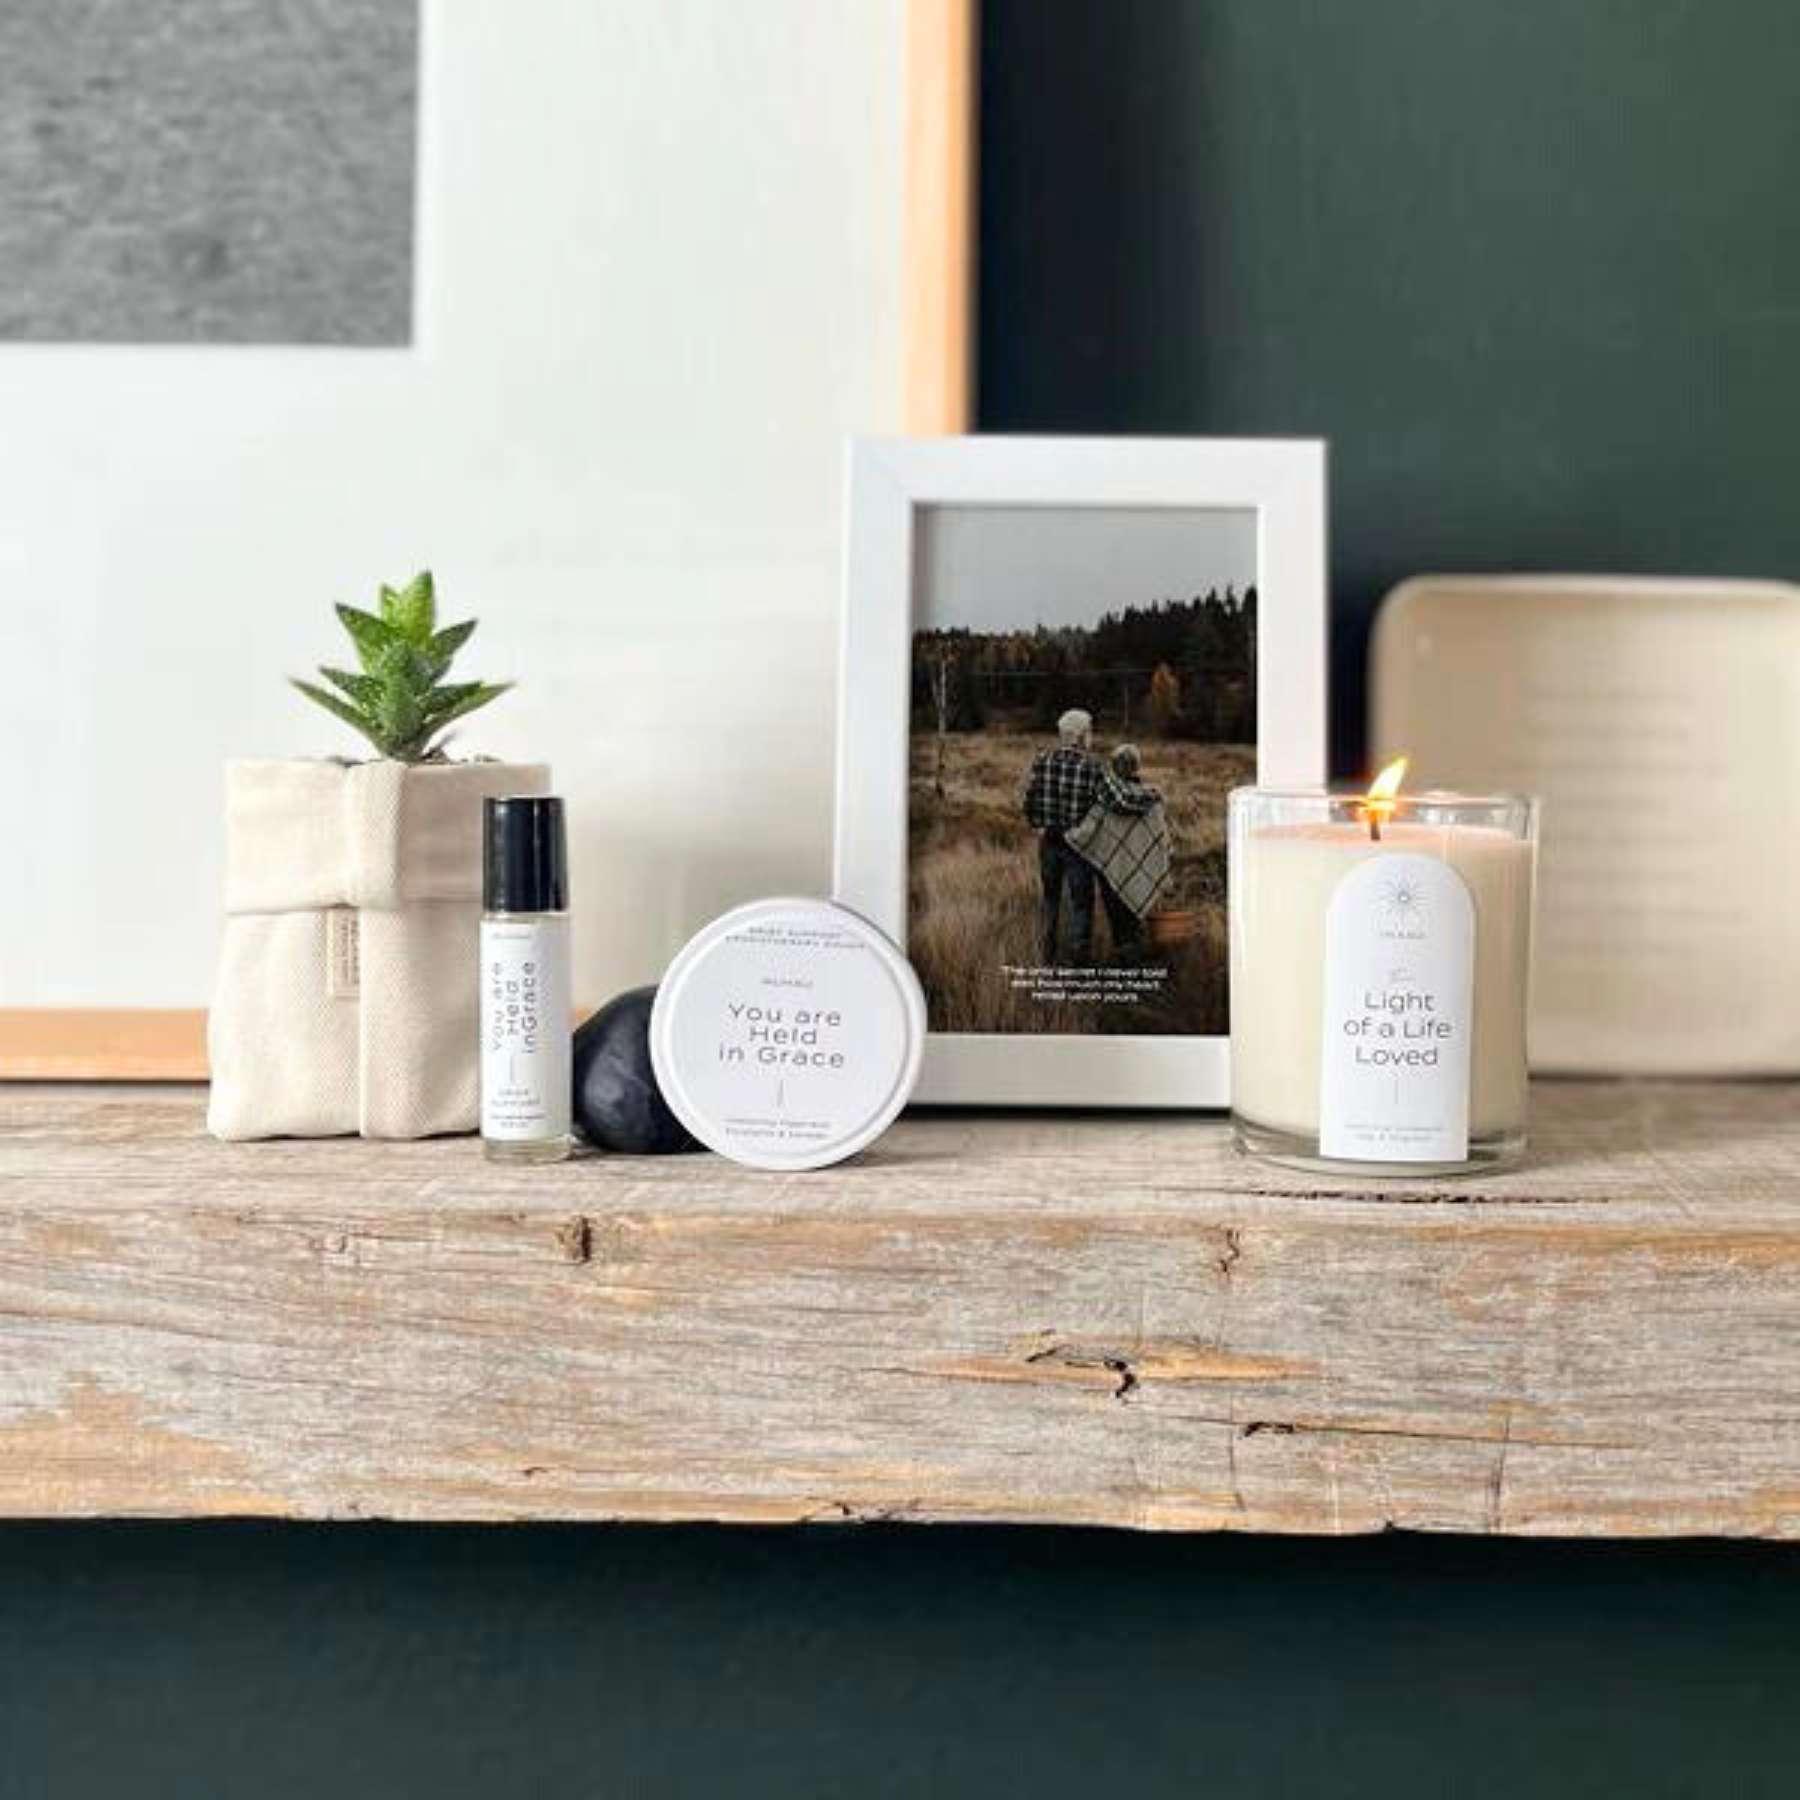 A serene display featuring a SOLANDIS plant in a fabric pot, wellness products, a framed photograph, and a lit candle, arranged on a wooden surface for a touch of tranquillity from Fabulous Flowers and Gifts.